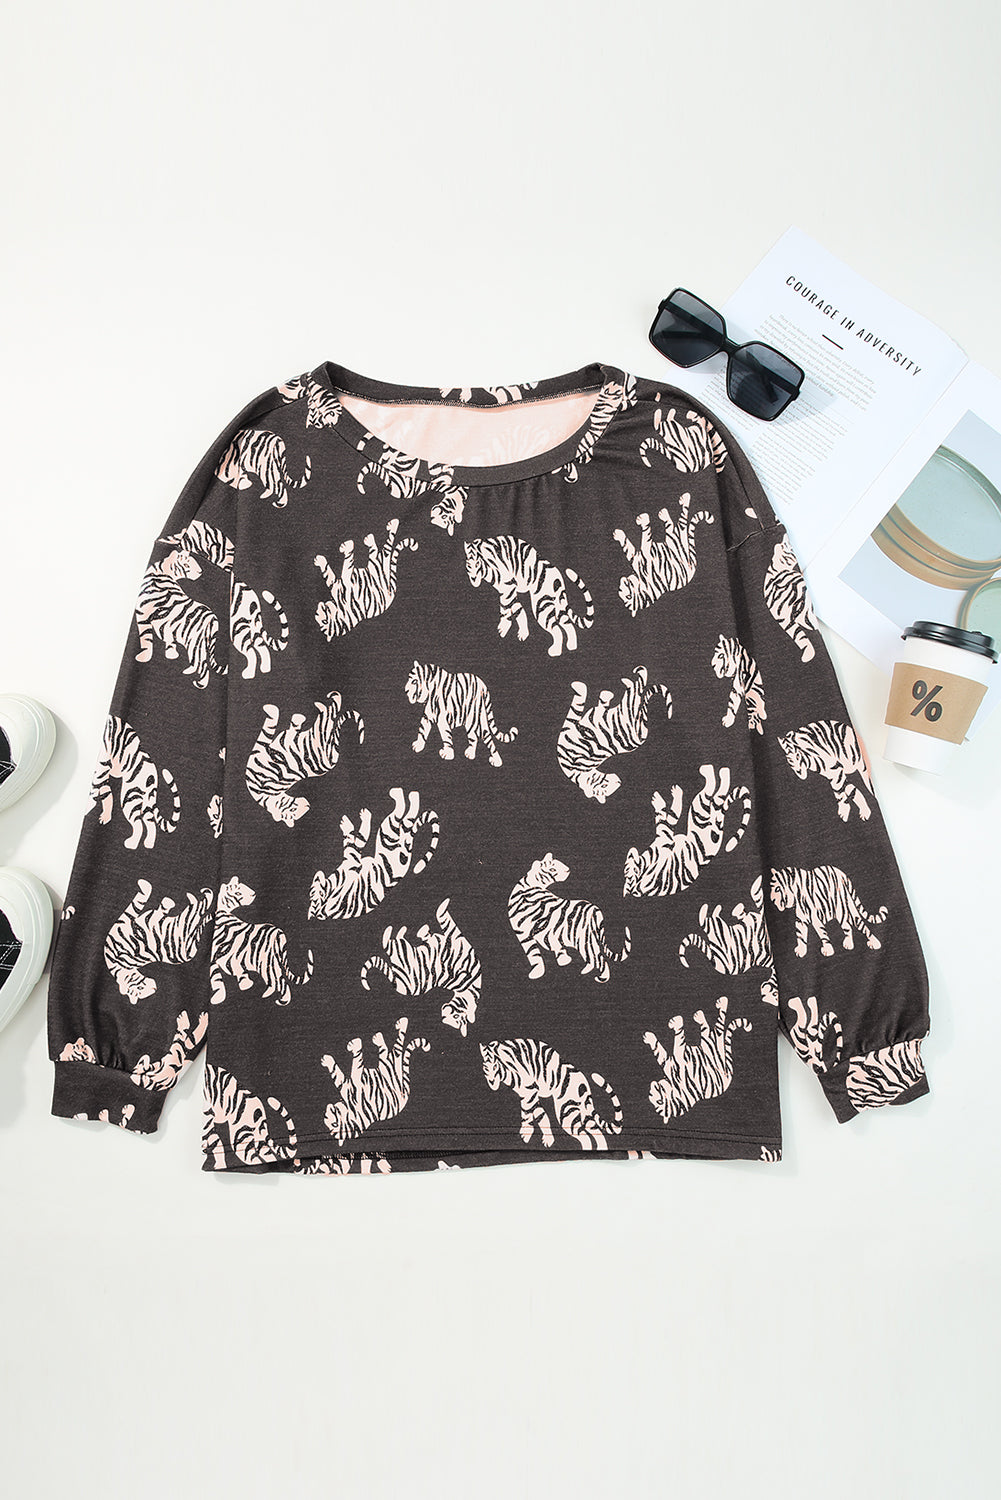 Lively Tiger Print Casual Sweatshirt